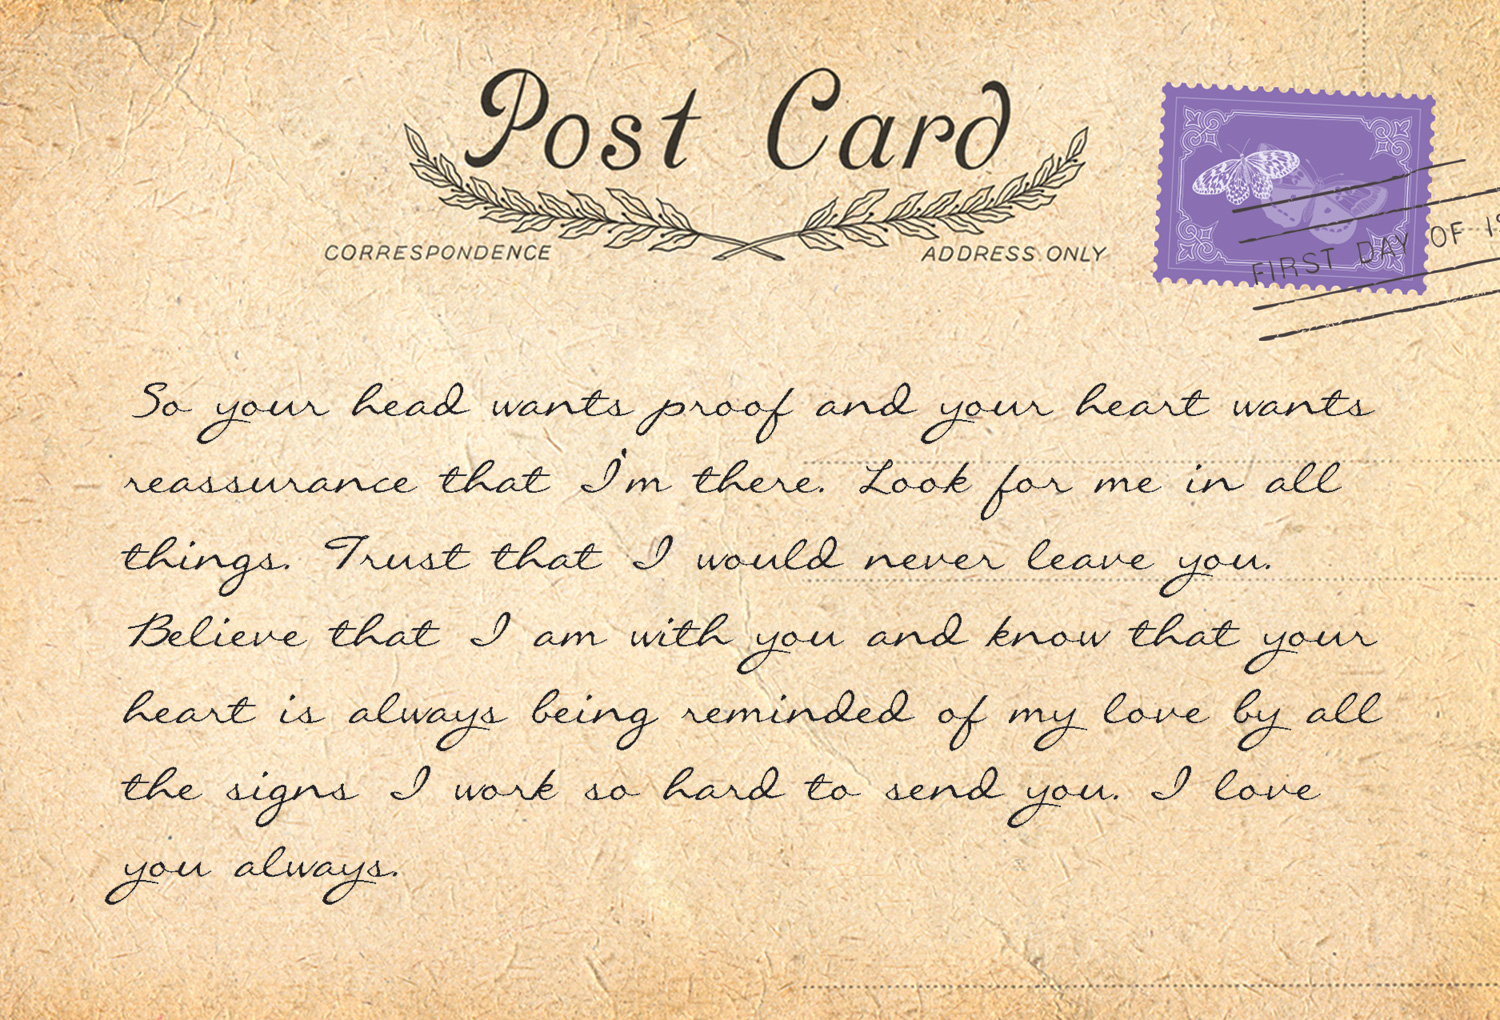 POSTCARDS FROM HEAVEN 2 - back 10